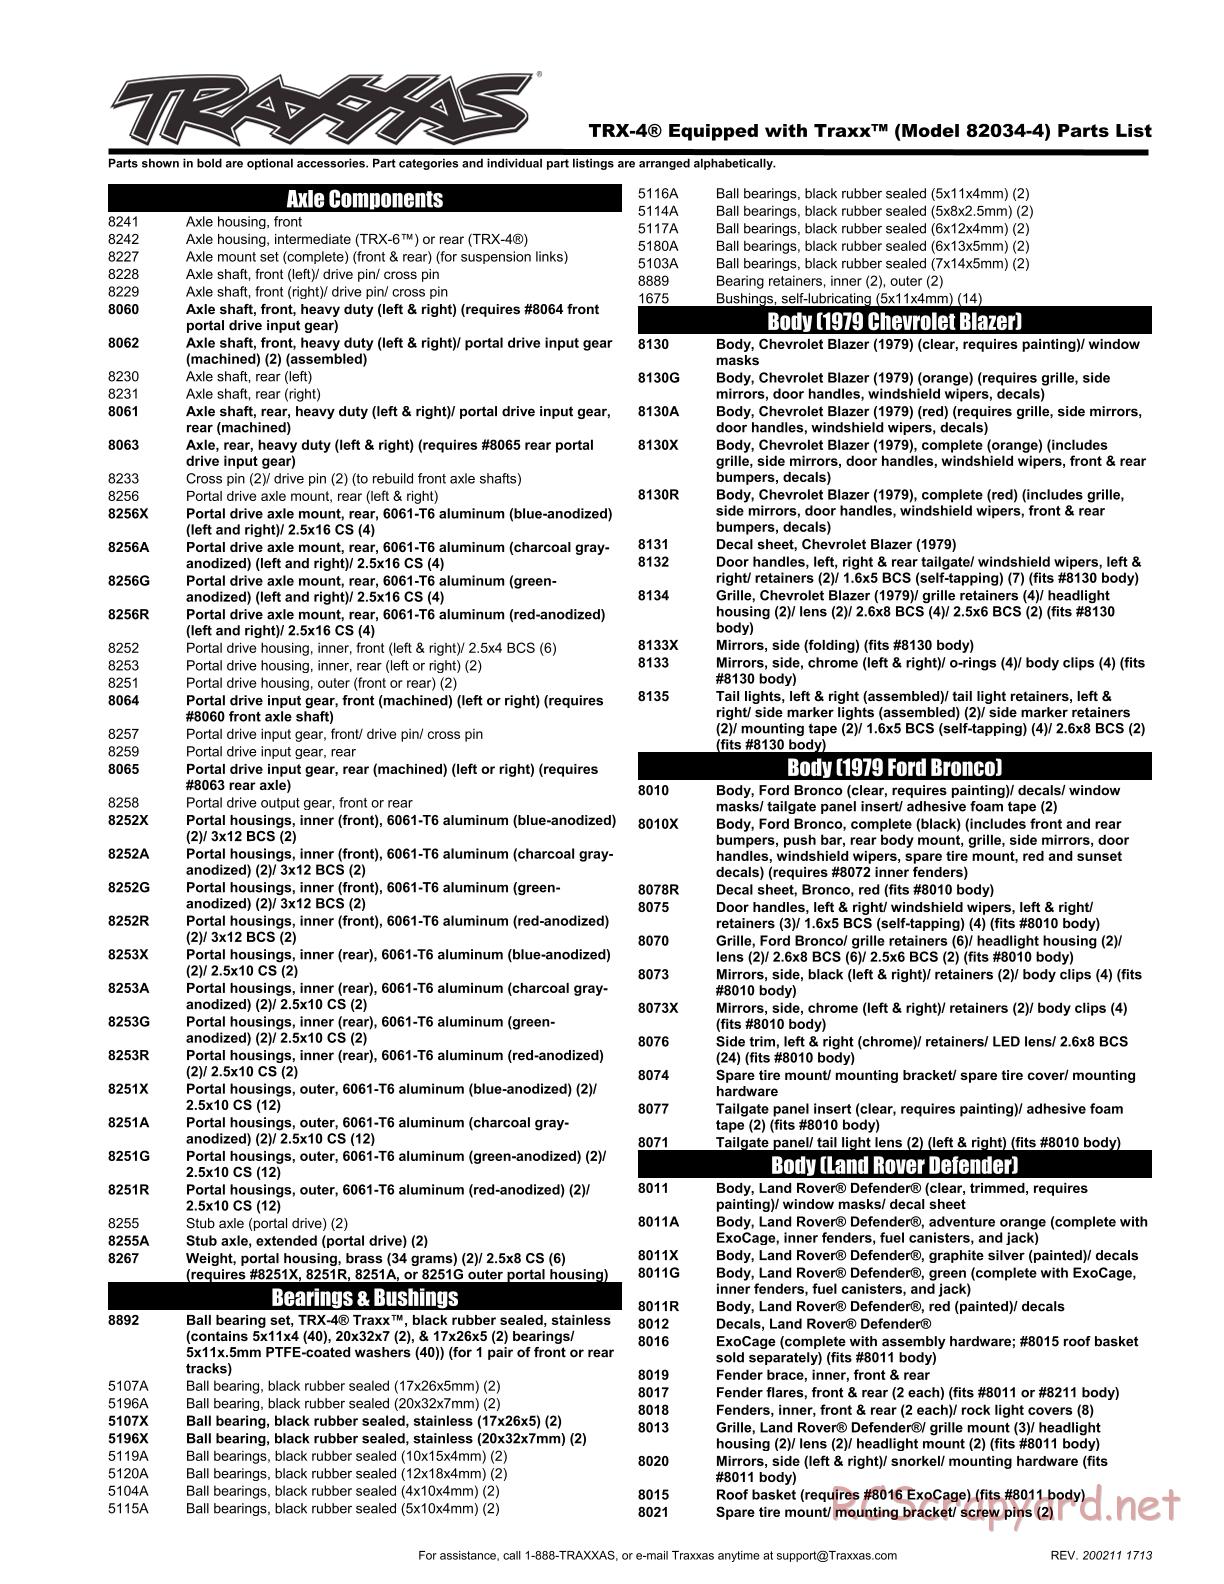 Traxxas - TRX-4 Equipped with Traxx - Parts List - Page 1